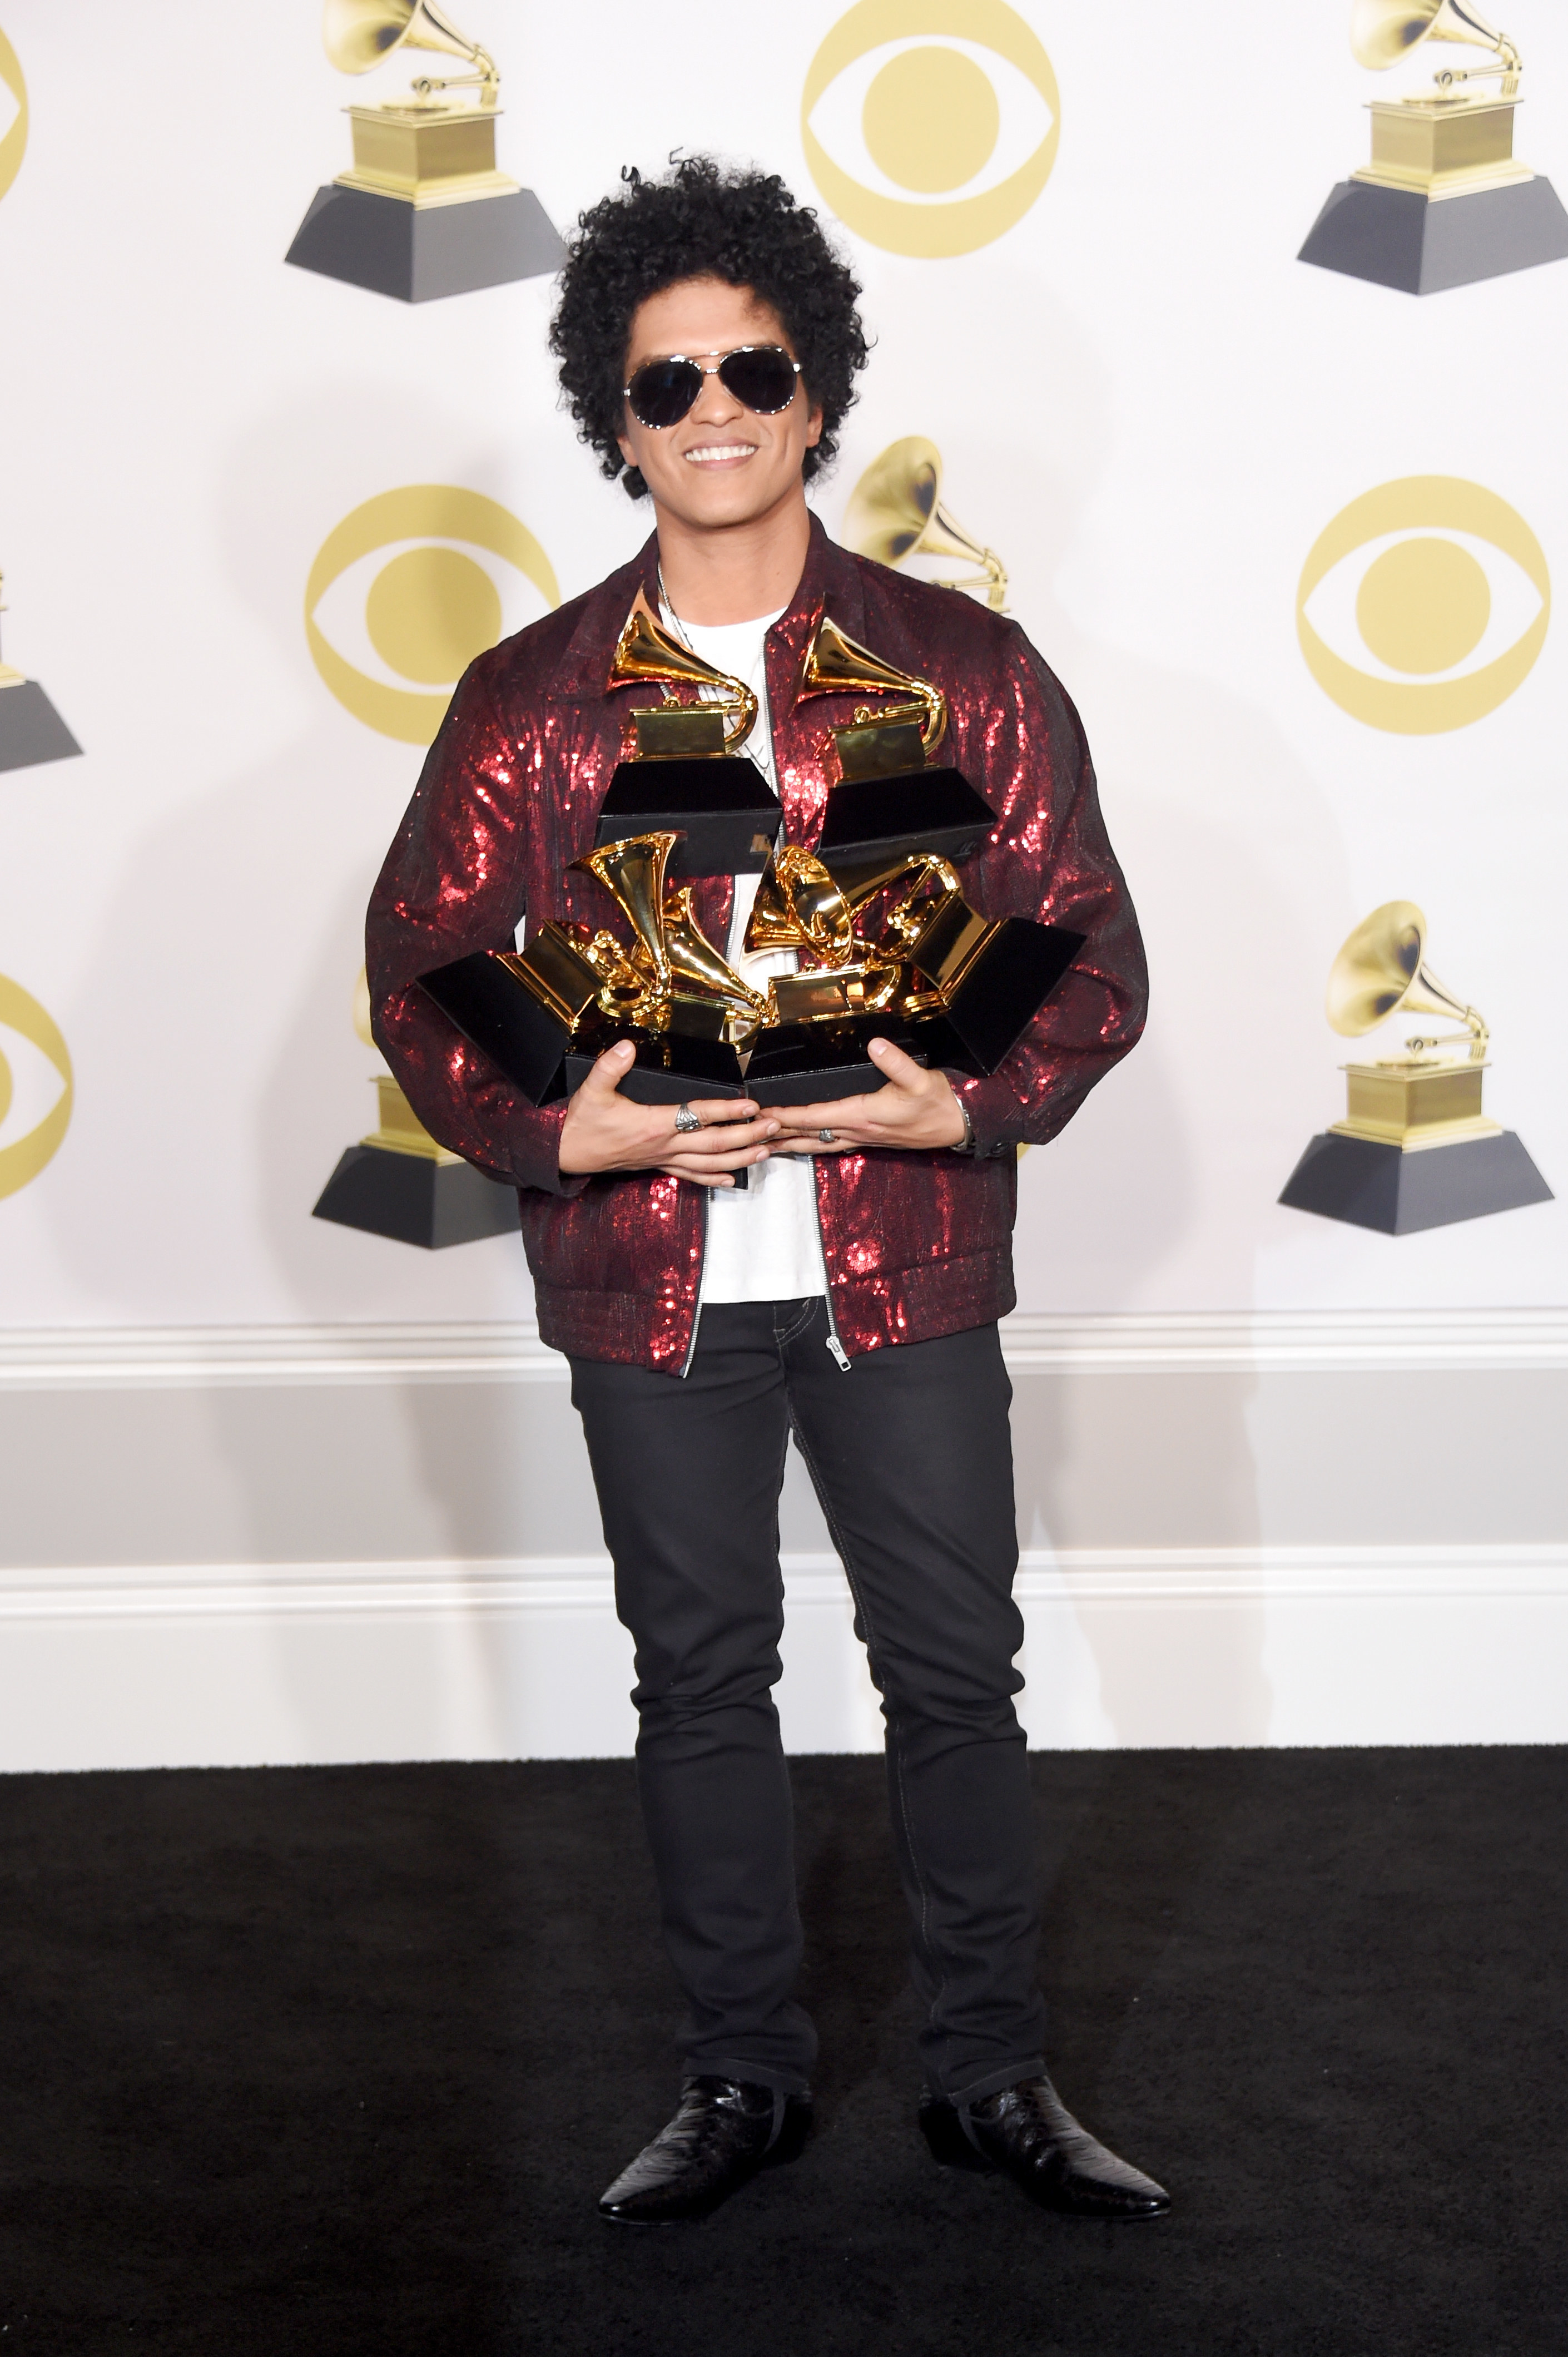 Bruno Mars holds his Grammys and smiles at the Grammy Awards on January 28, 2018